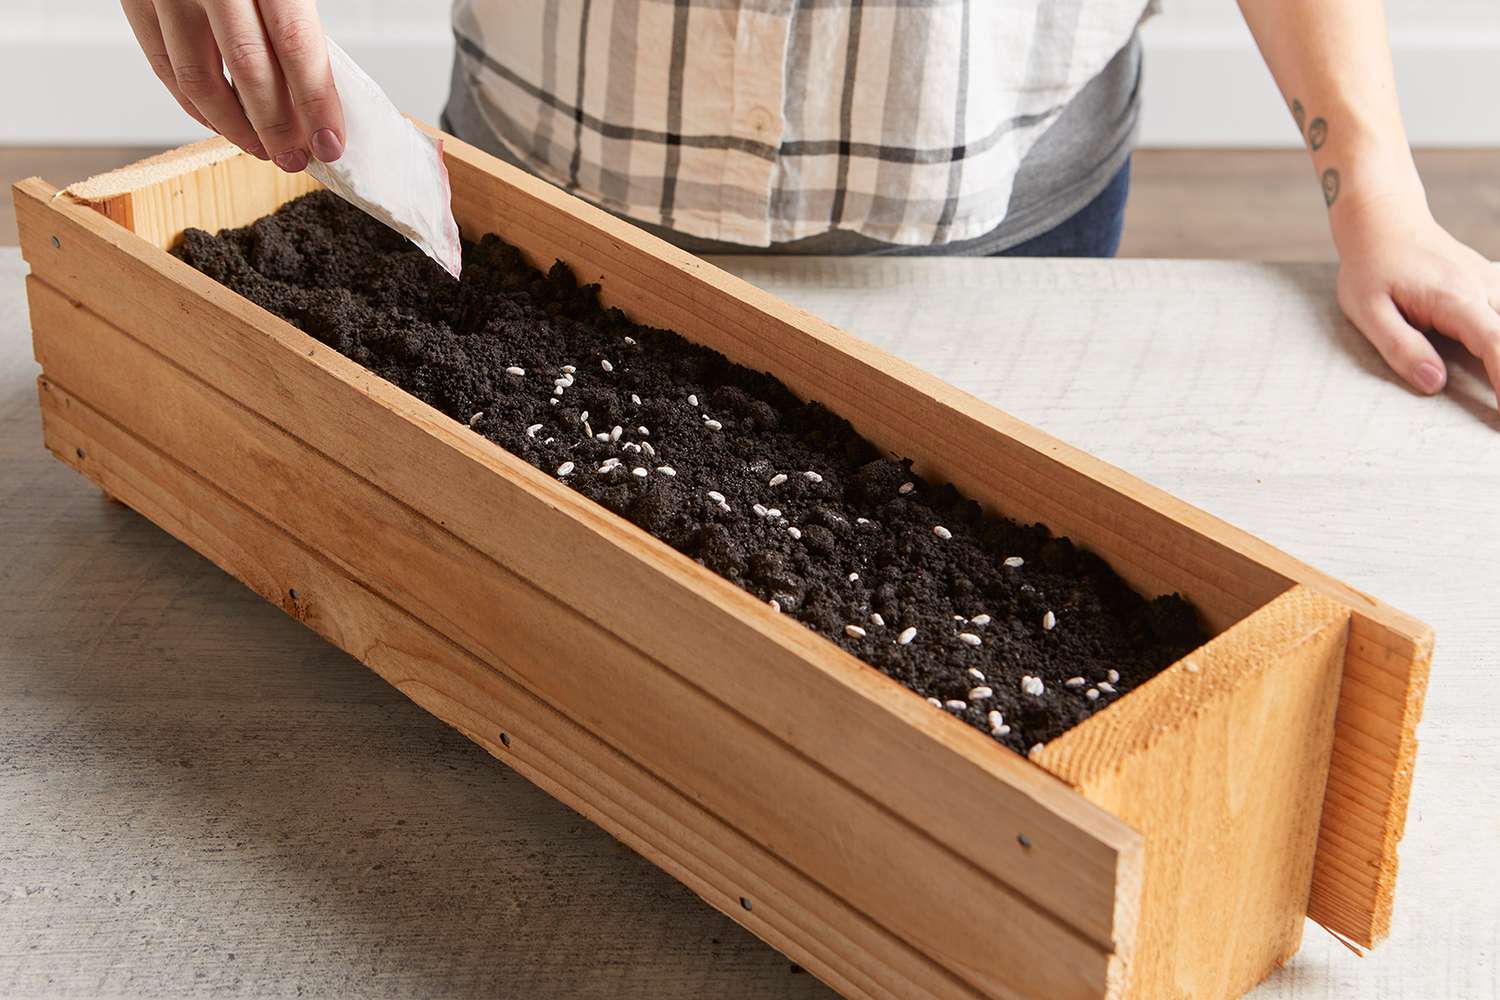 person pouring seeds from bag into wooden planter